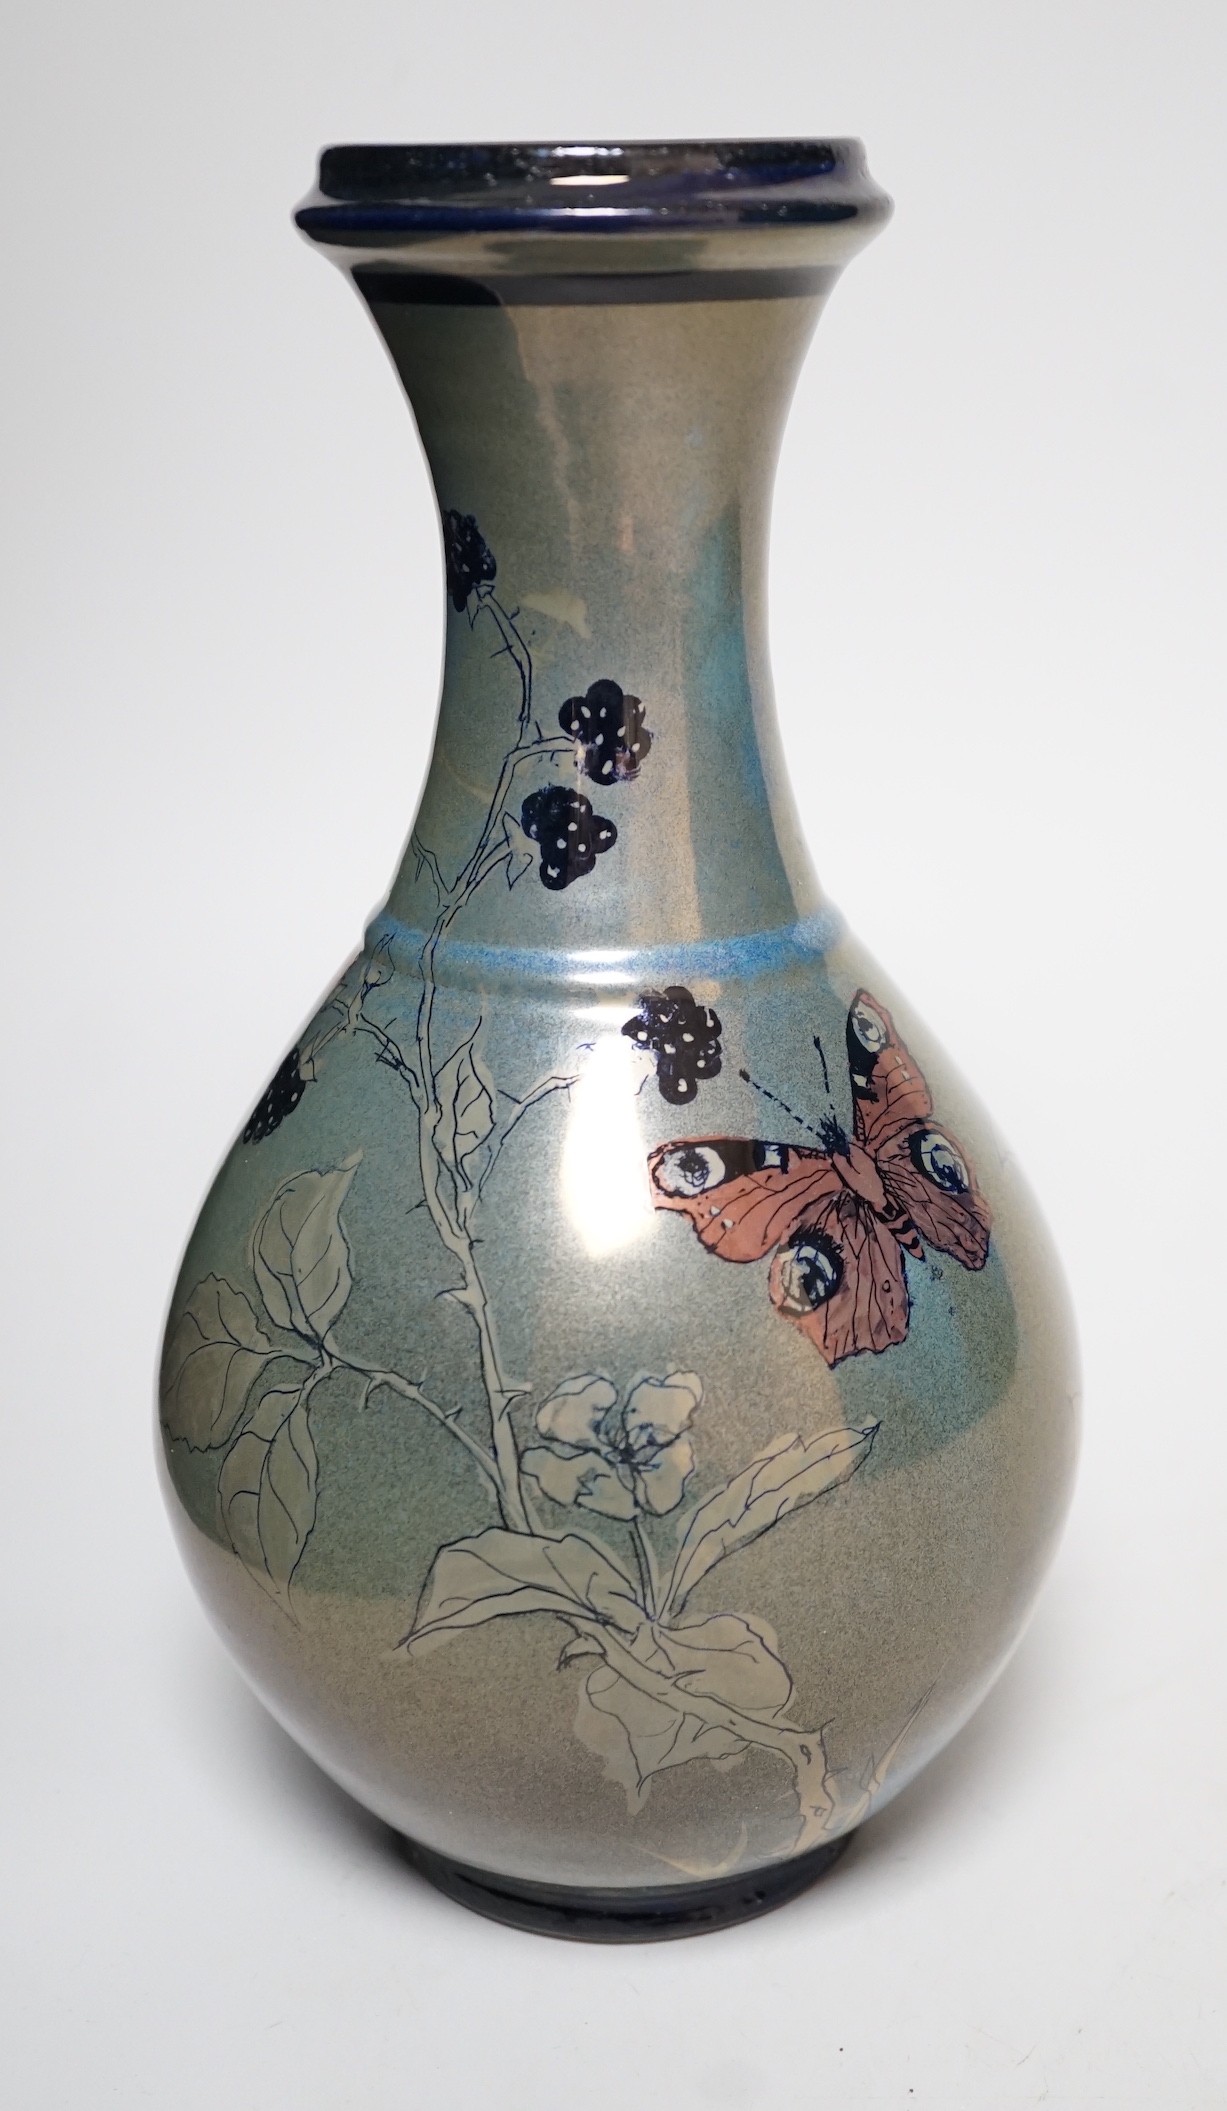 Jonathan Chiswell Jones, a lustre vase - Peacock butterfly and brambles, No 8169, 24cm.